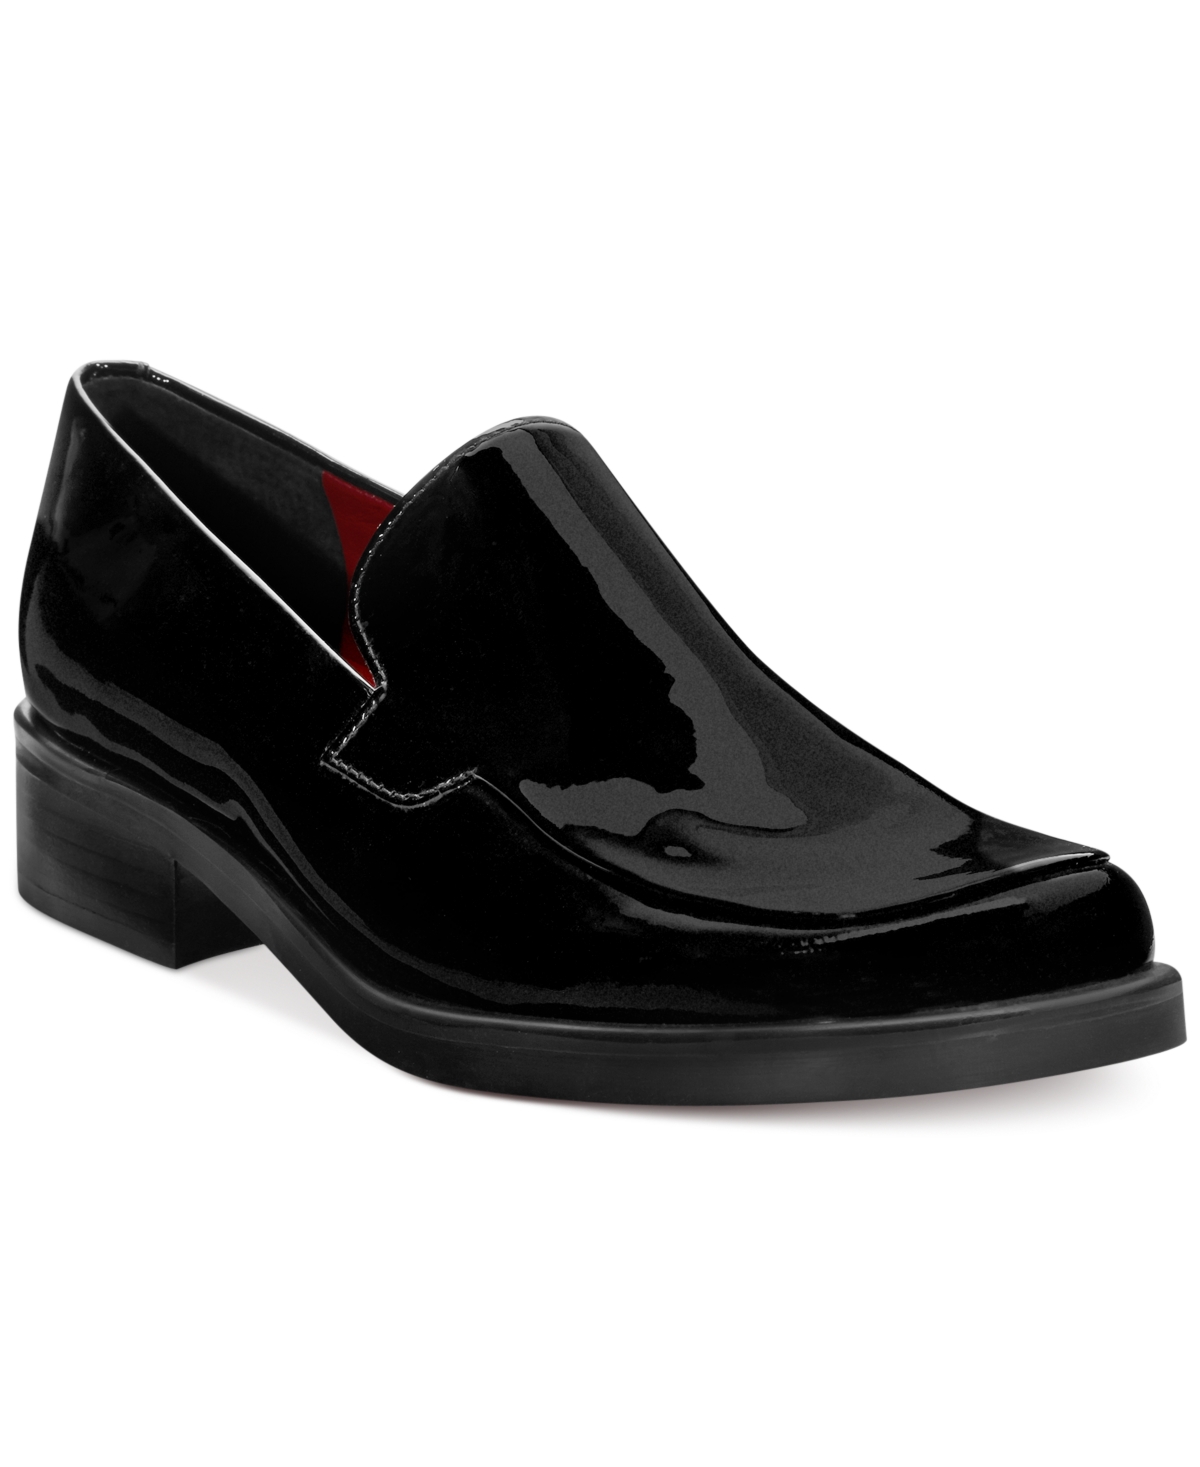 Women's Bocca Slip-on Loafers - Black Leather